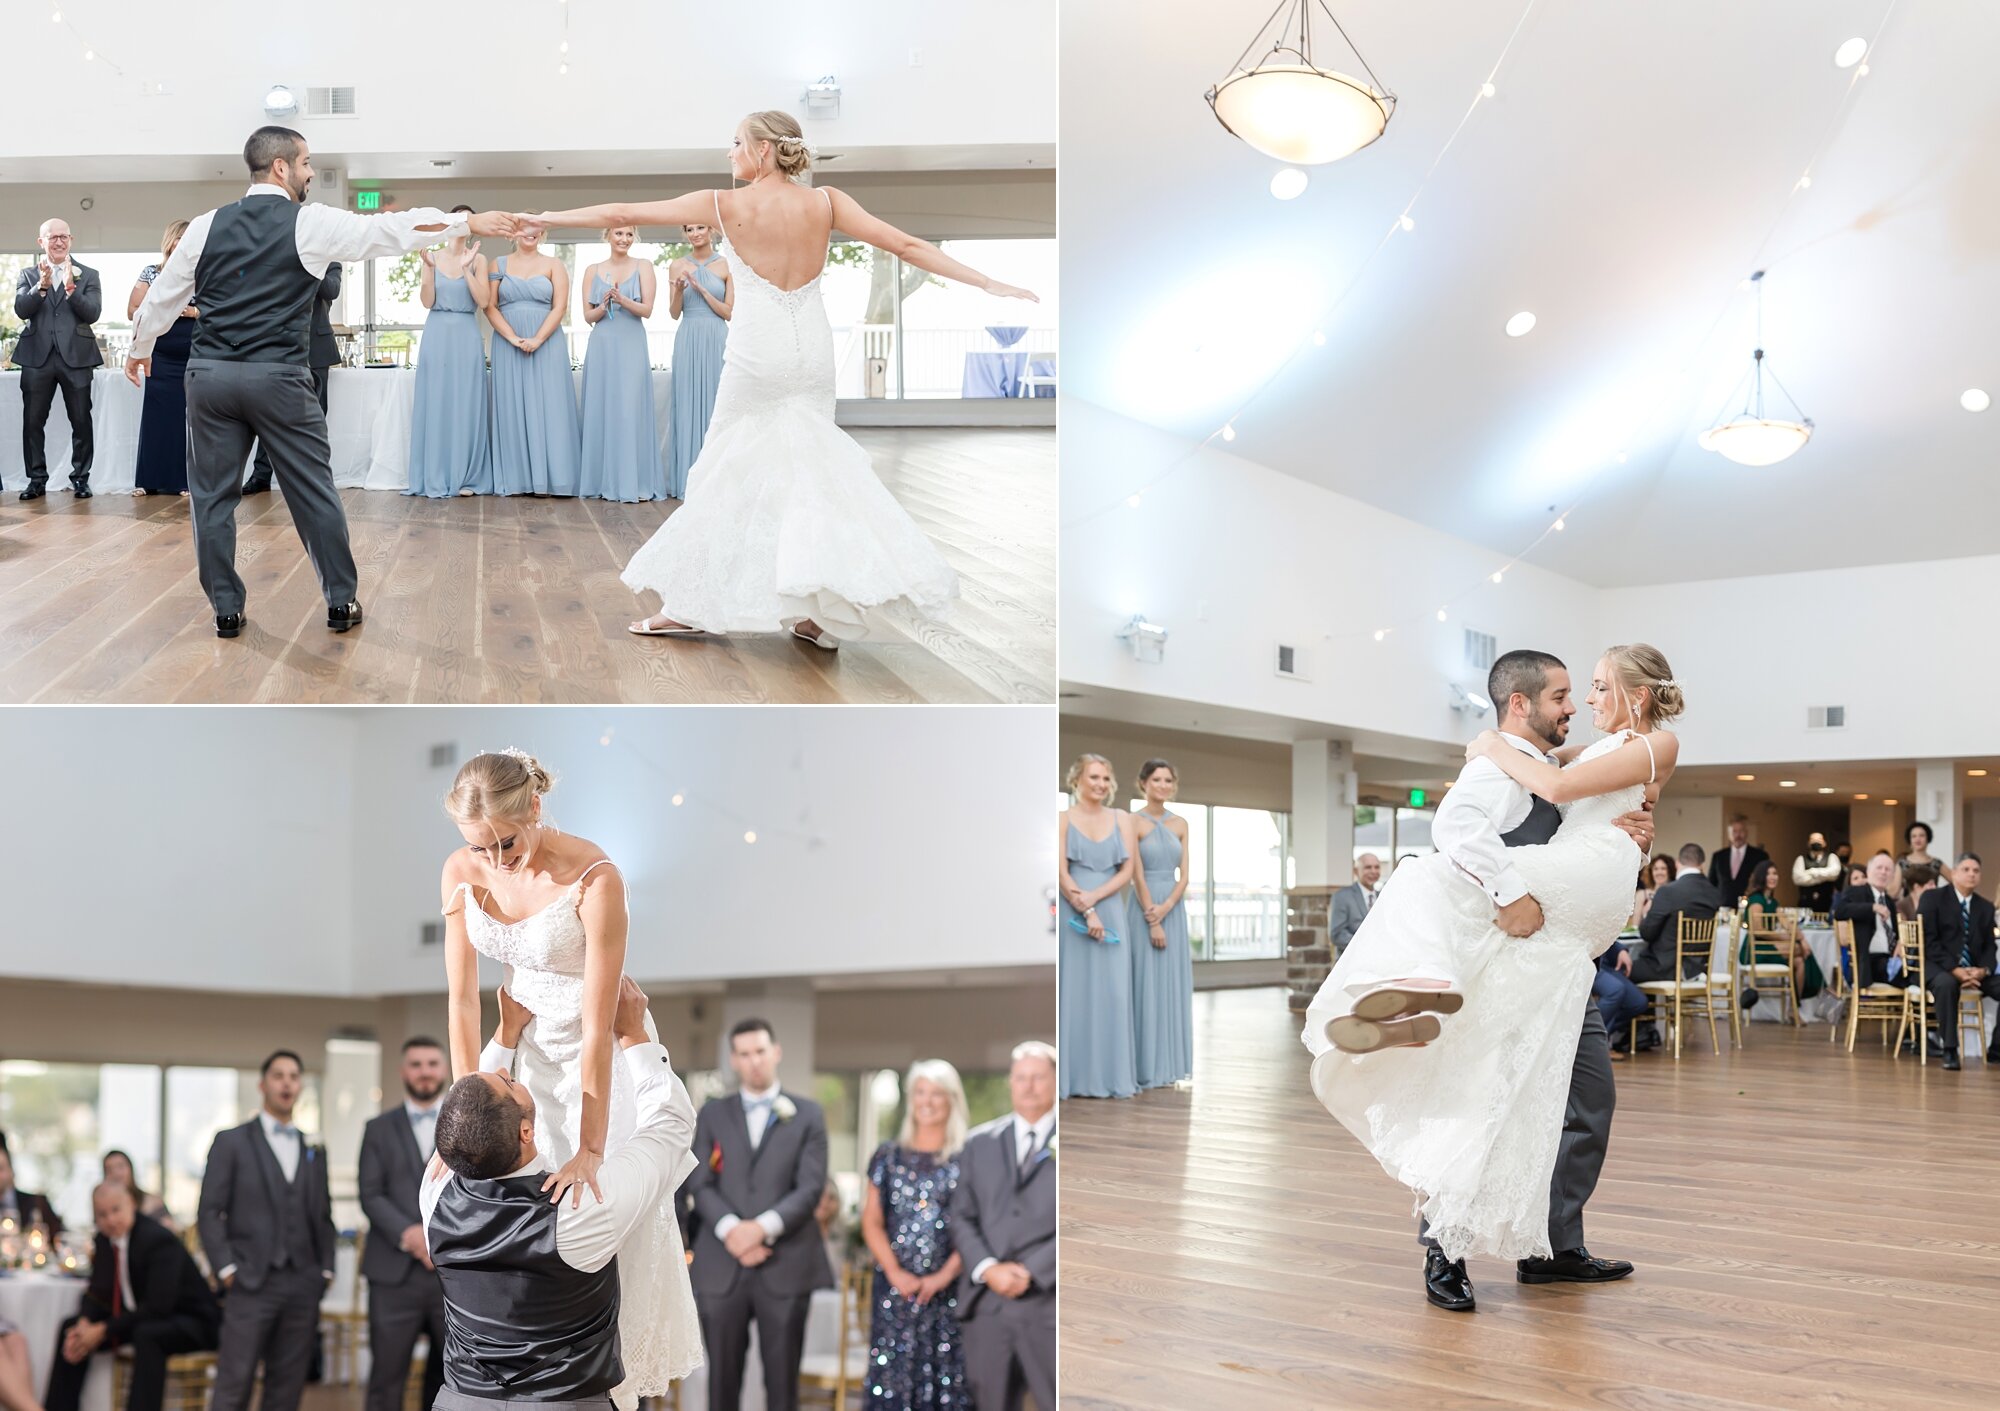  Their first dance was amazing! 